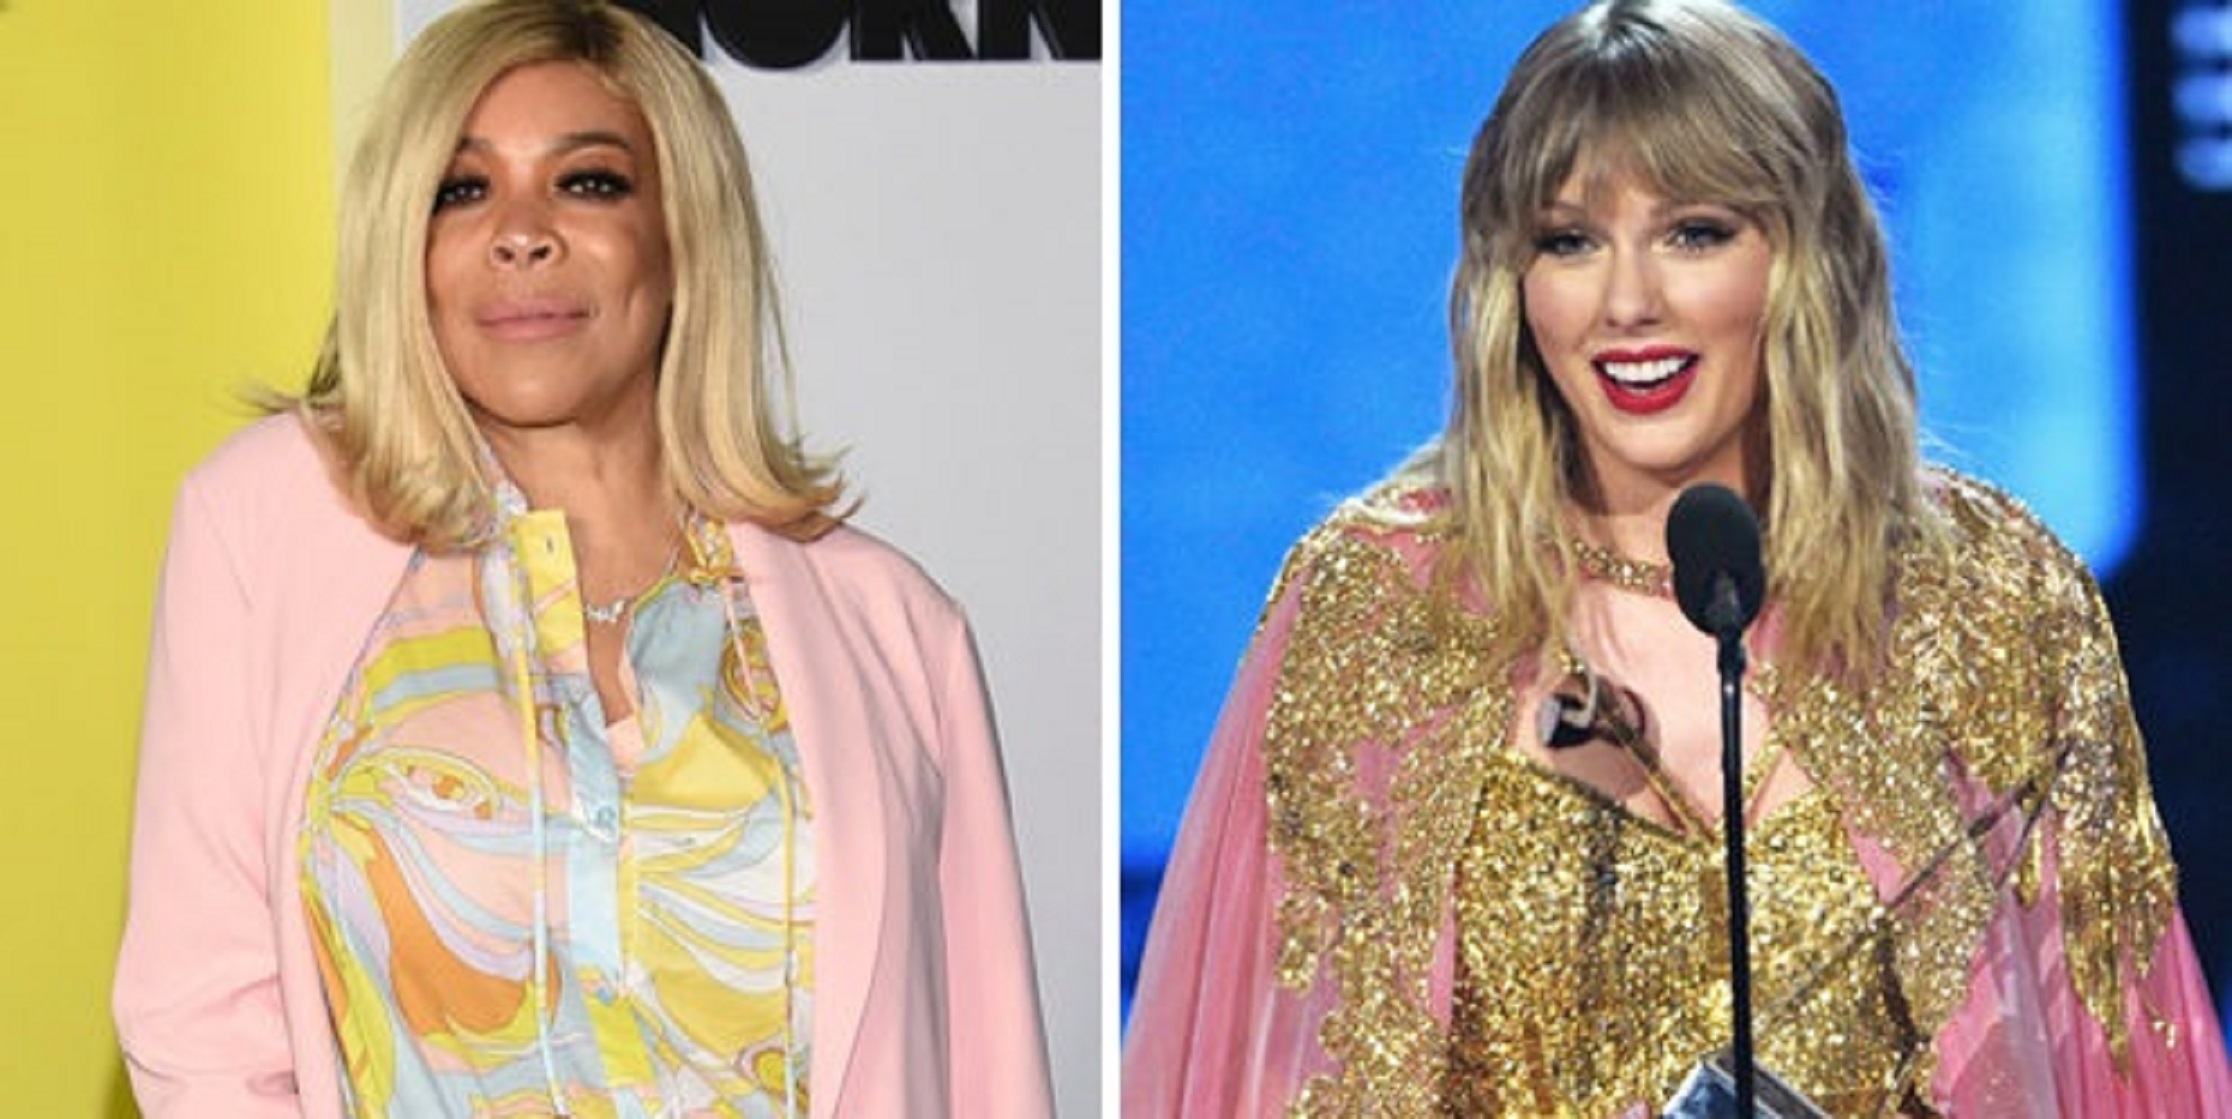 Wendy Williams on Taylor Swift’s ‘Artist Of The Decade’ Win – ‘Taste Has Cheapened Through the Years’